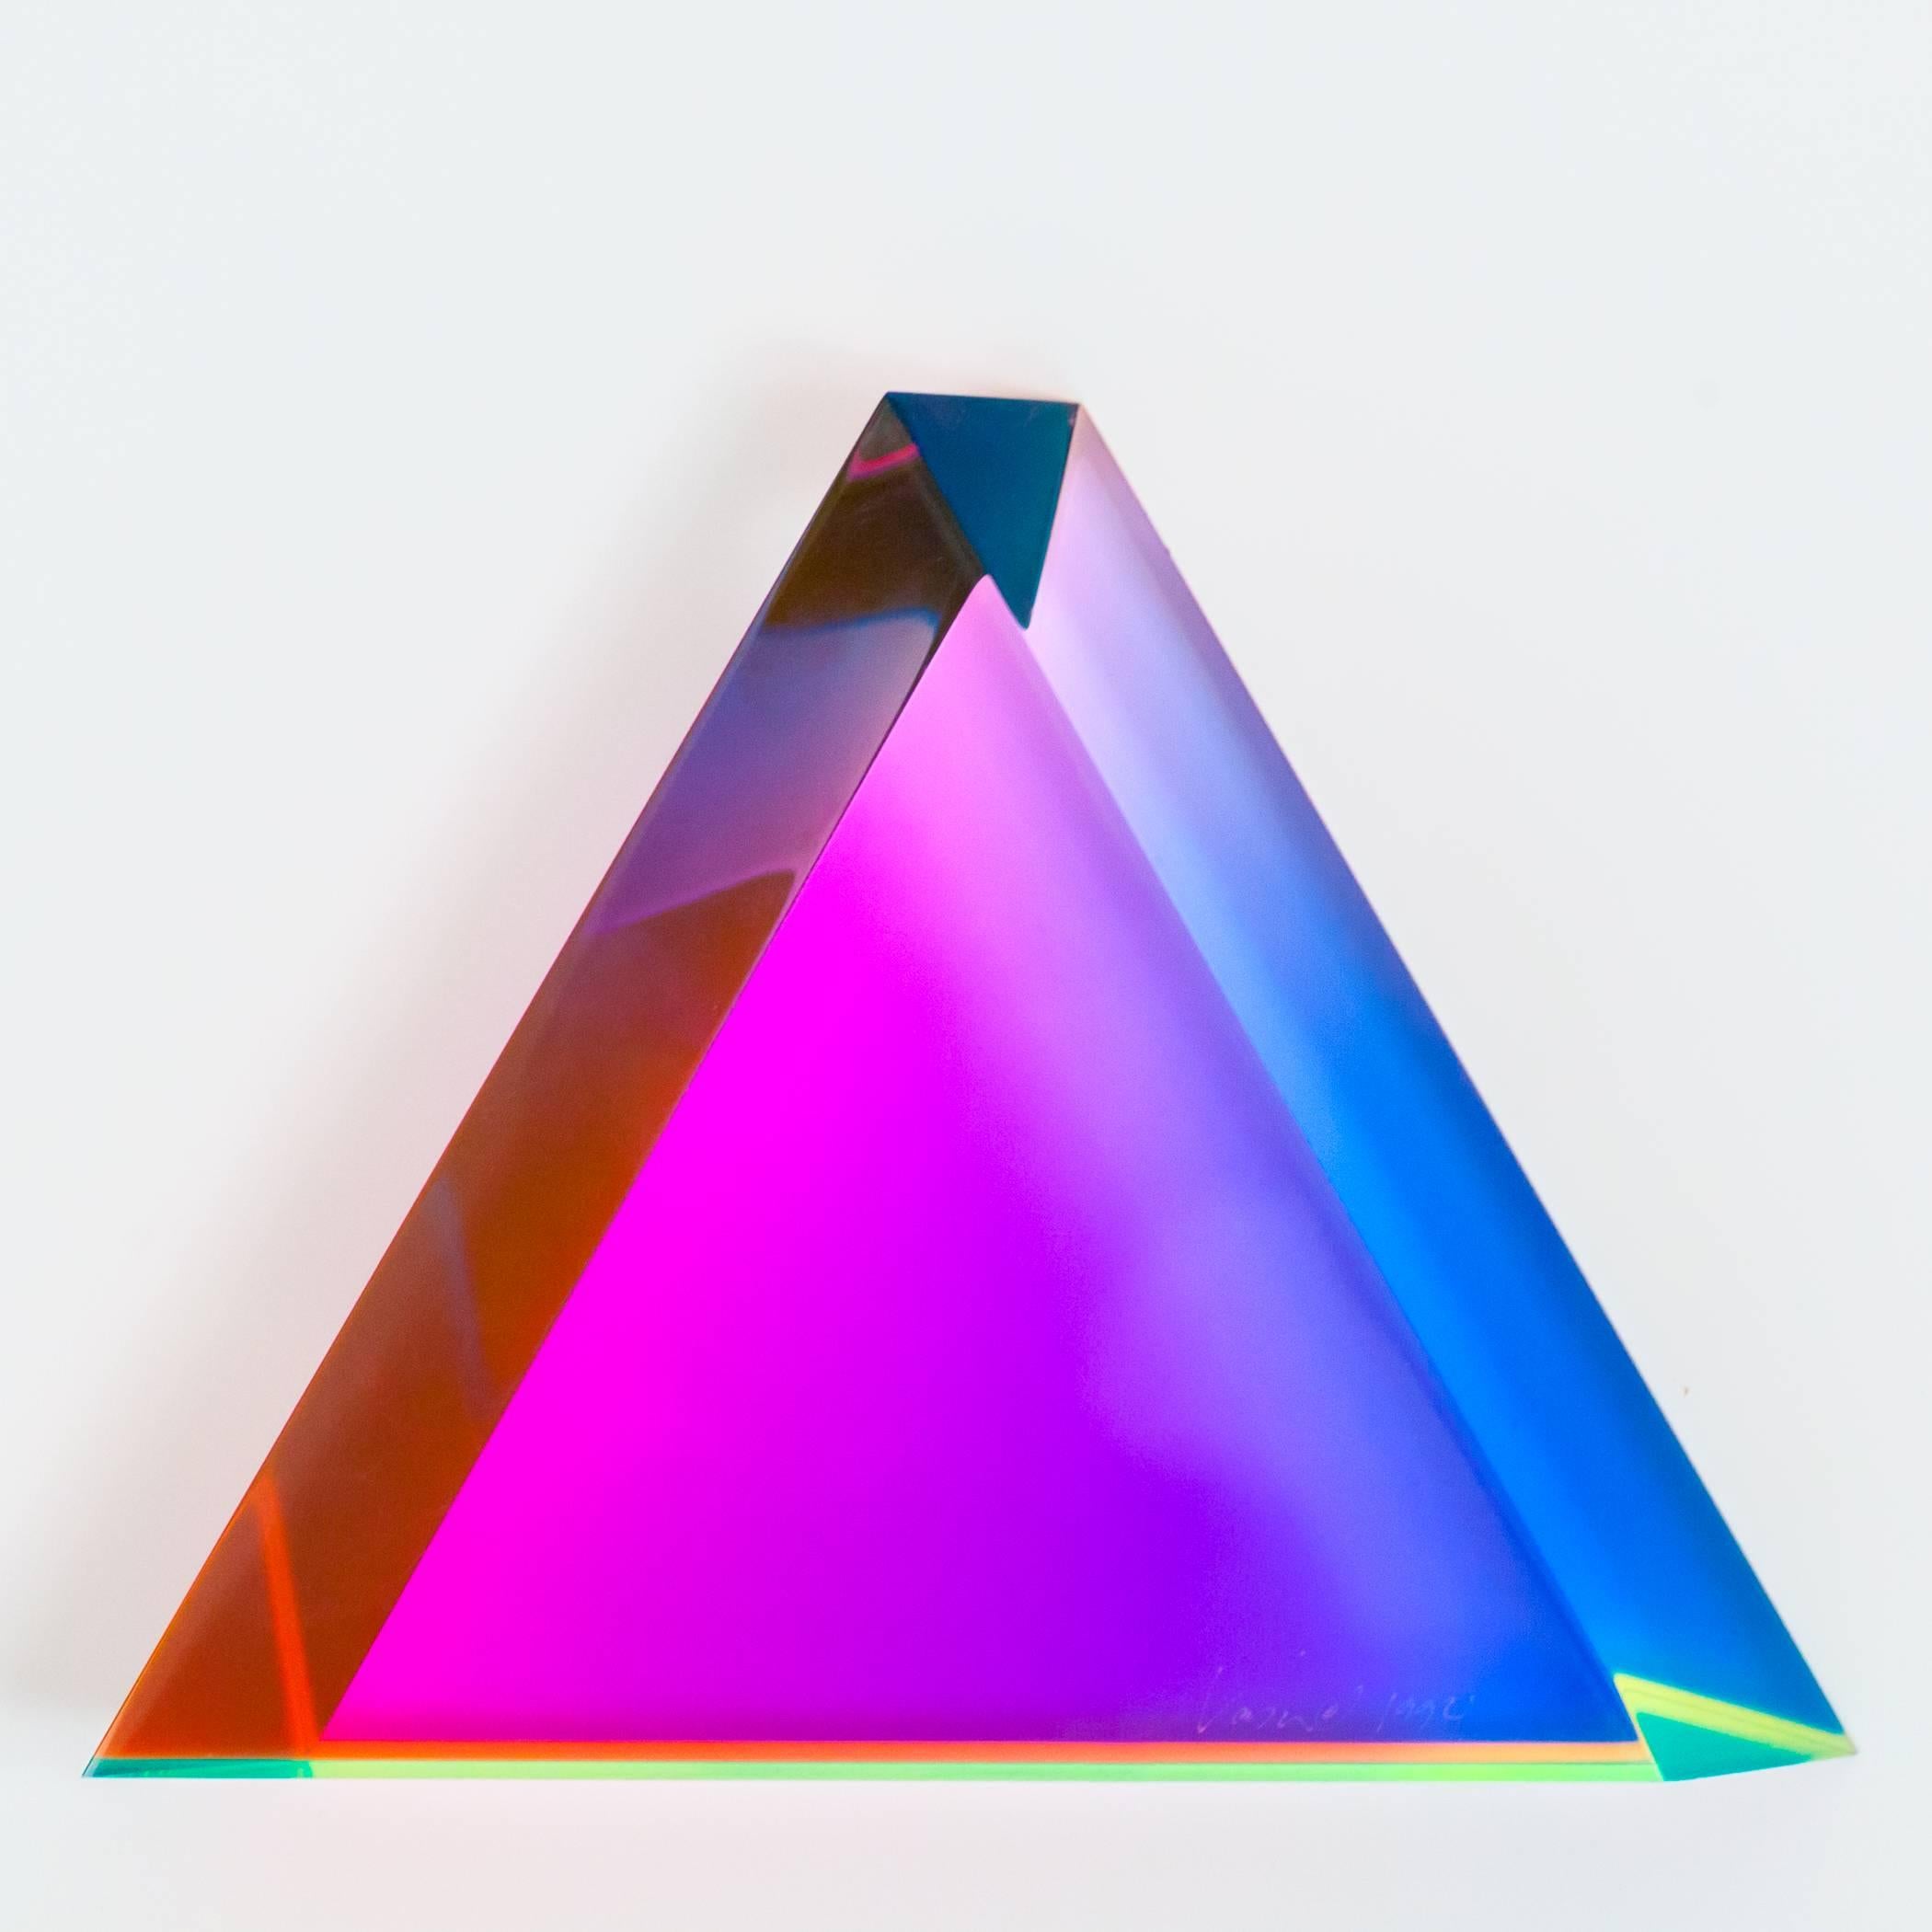 The dynamic color-shifting triangle is one of Vasa Mihich's most iconic creations.

This example from 1992, is one of the earliest we've ever handled, and is realized in the artist's favorite palette: candy fuchsia, hazy blue, sun-kissed orange